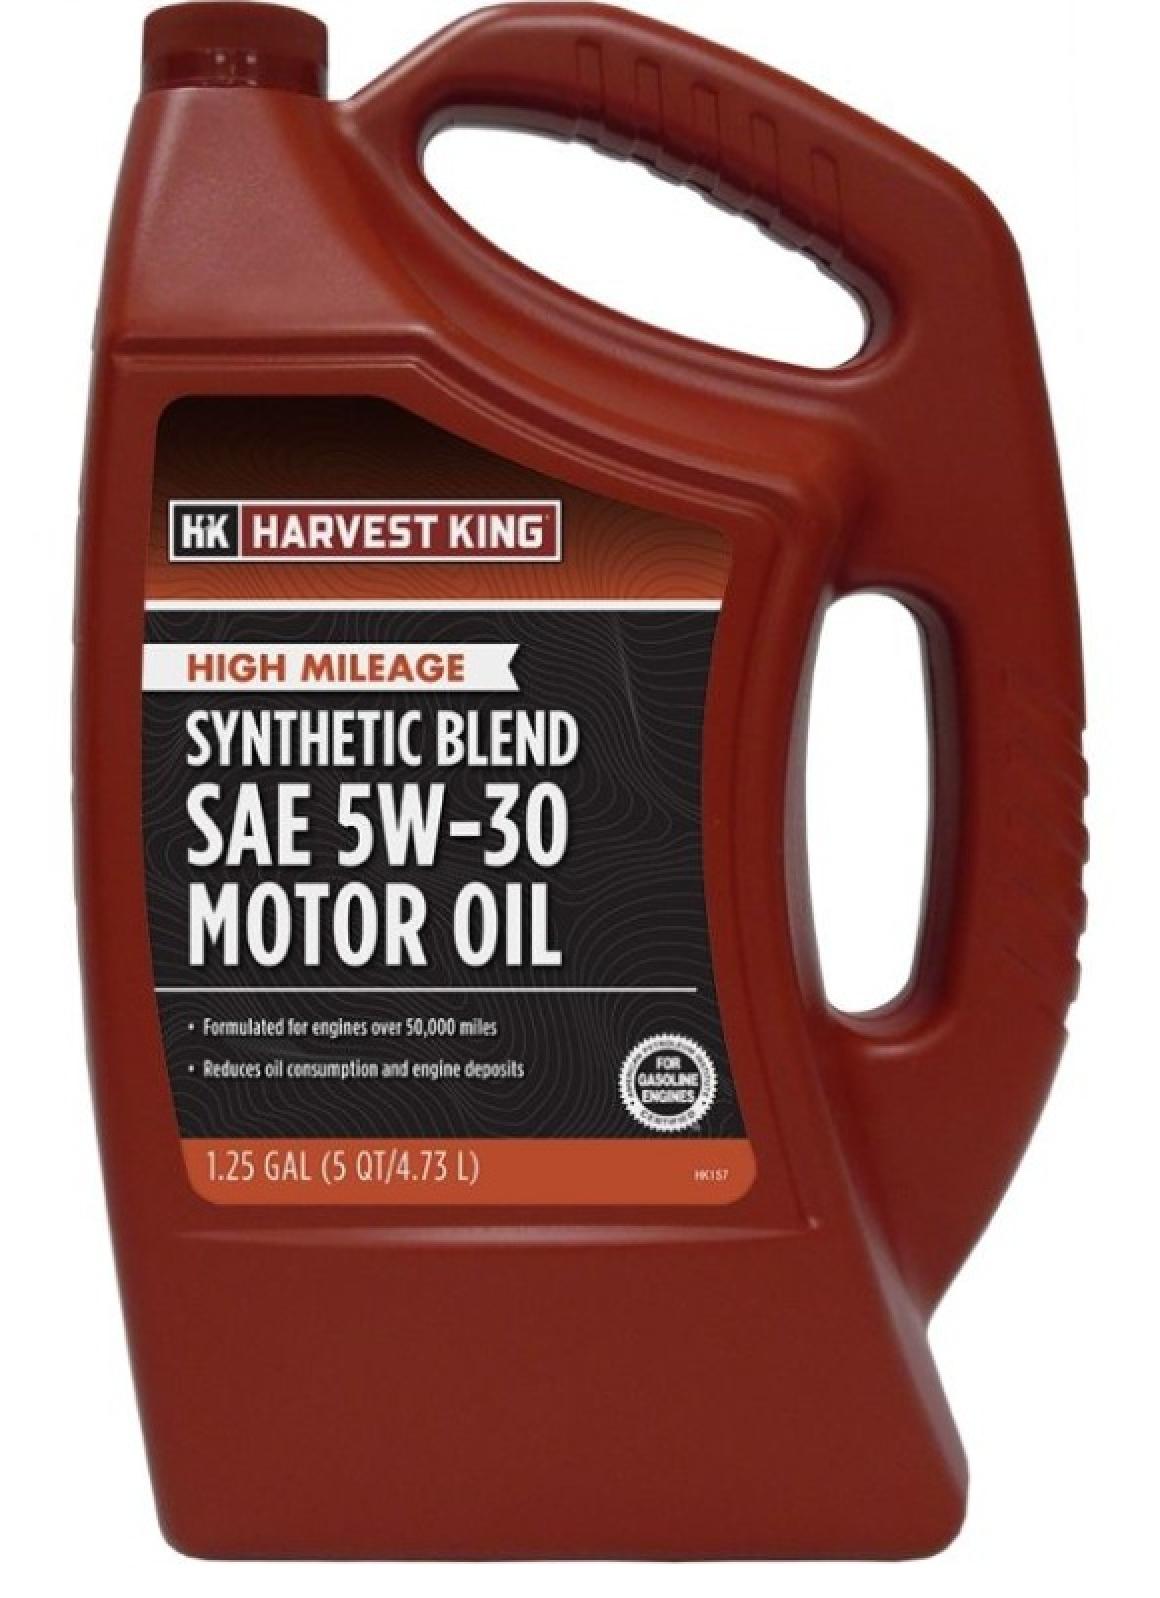 Harvest King High Mileage Synthetic Blend SAE 5W-30 Motor Oil